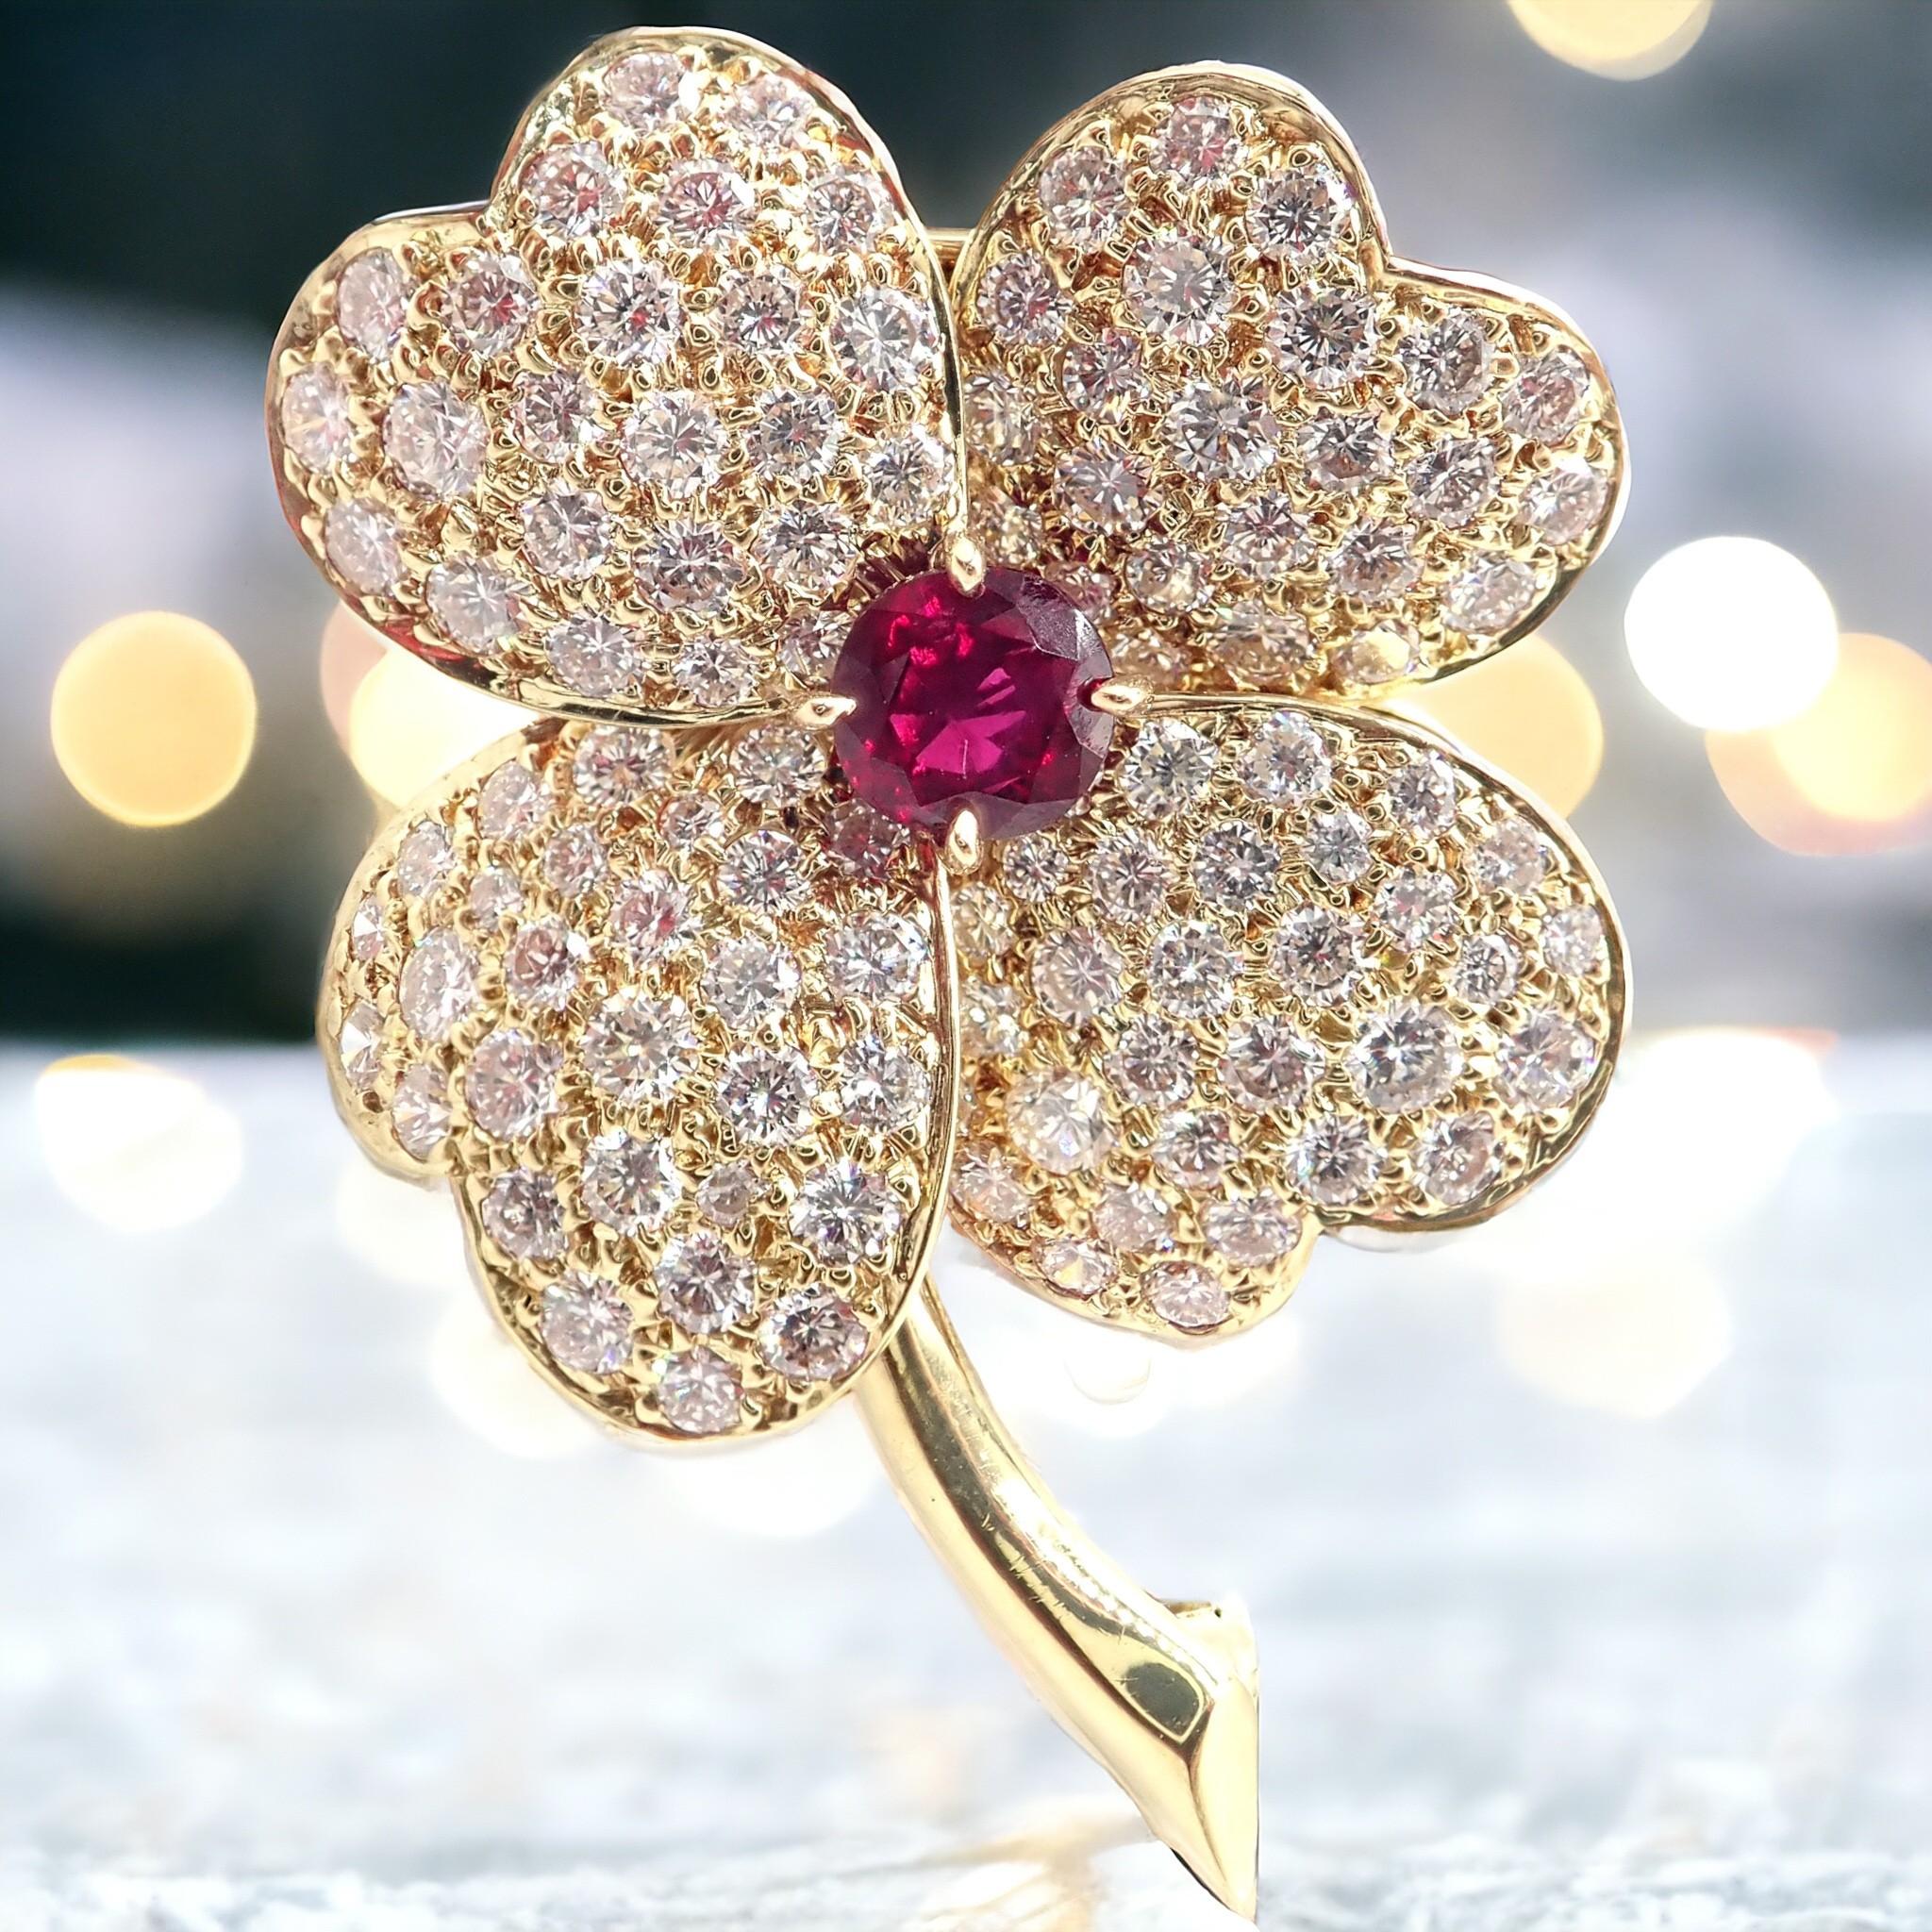 18k Yellow Gold Diamond And Ruby Cosmos Pendant Brooch by Van Cleef & Arpels
This vintage Van Cleef & Arpels Cosmos Brooch Pendant is a stunning piece, crafted from 18k yellow gold. 
It features an elegant, floral-inspired design, beautifully